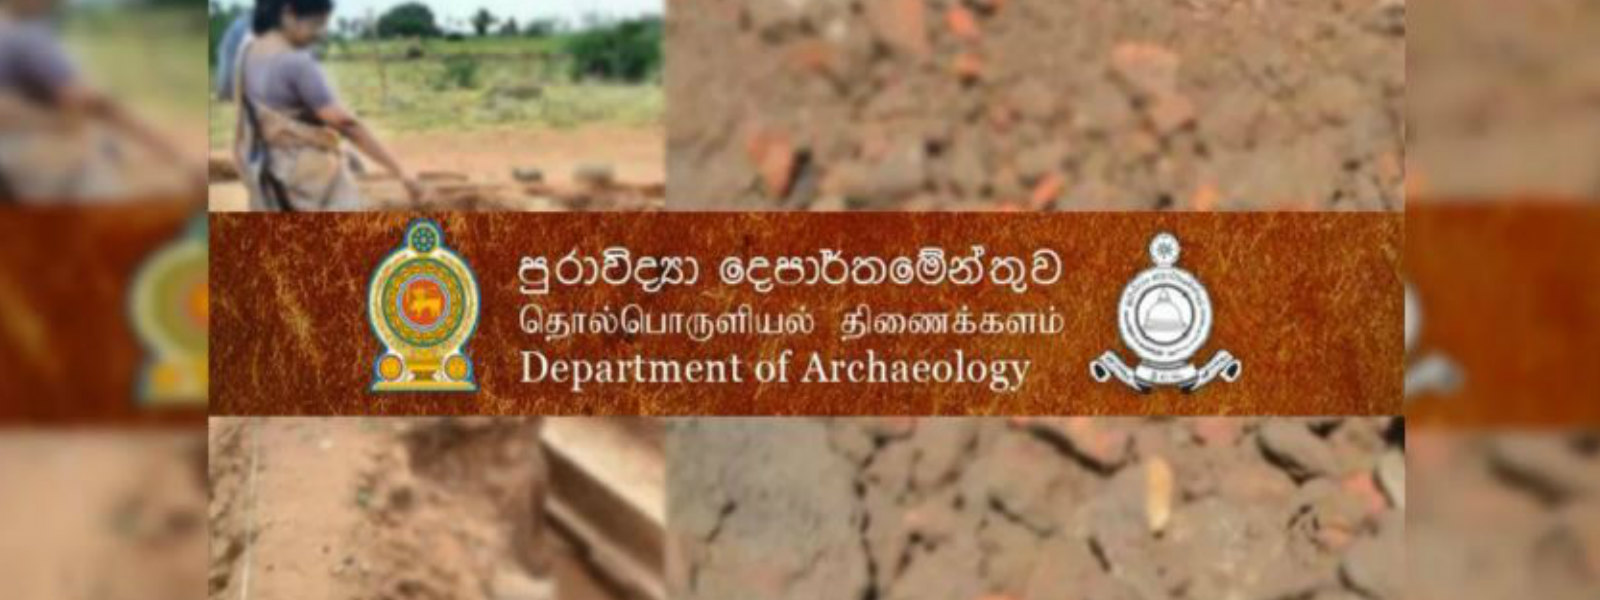 Two stupas belonging to the 2 BC discovered